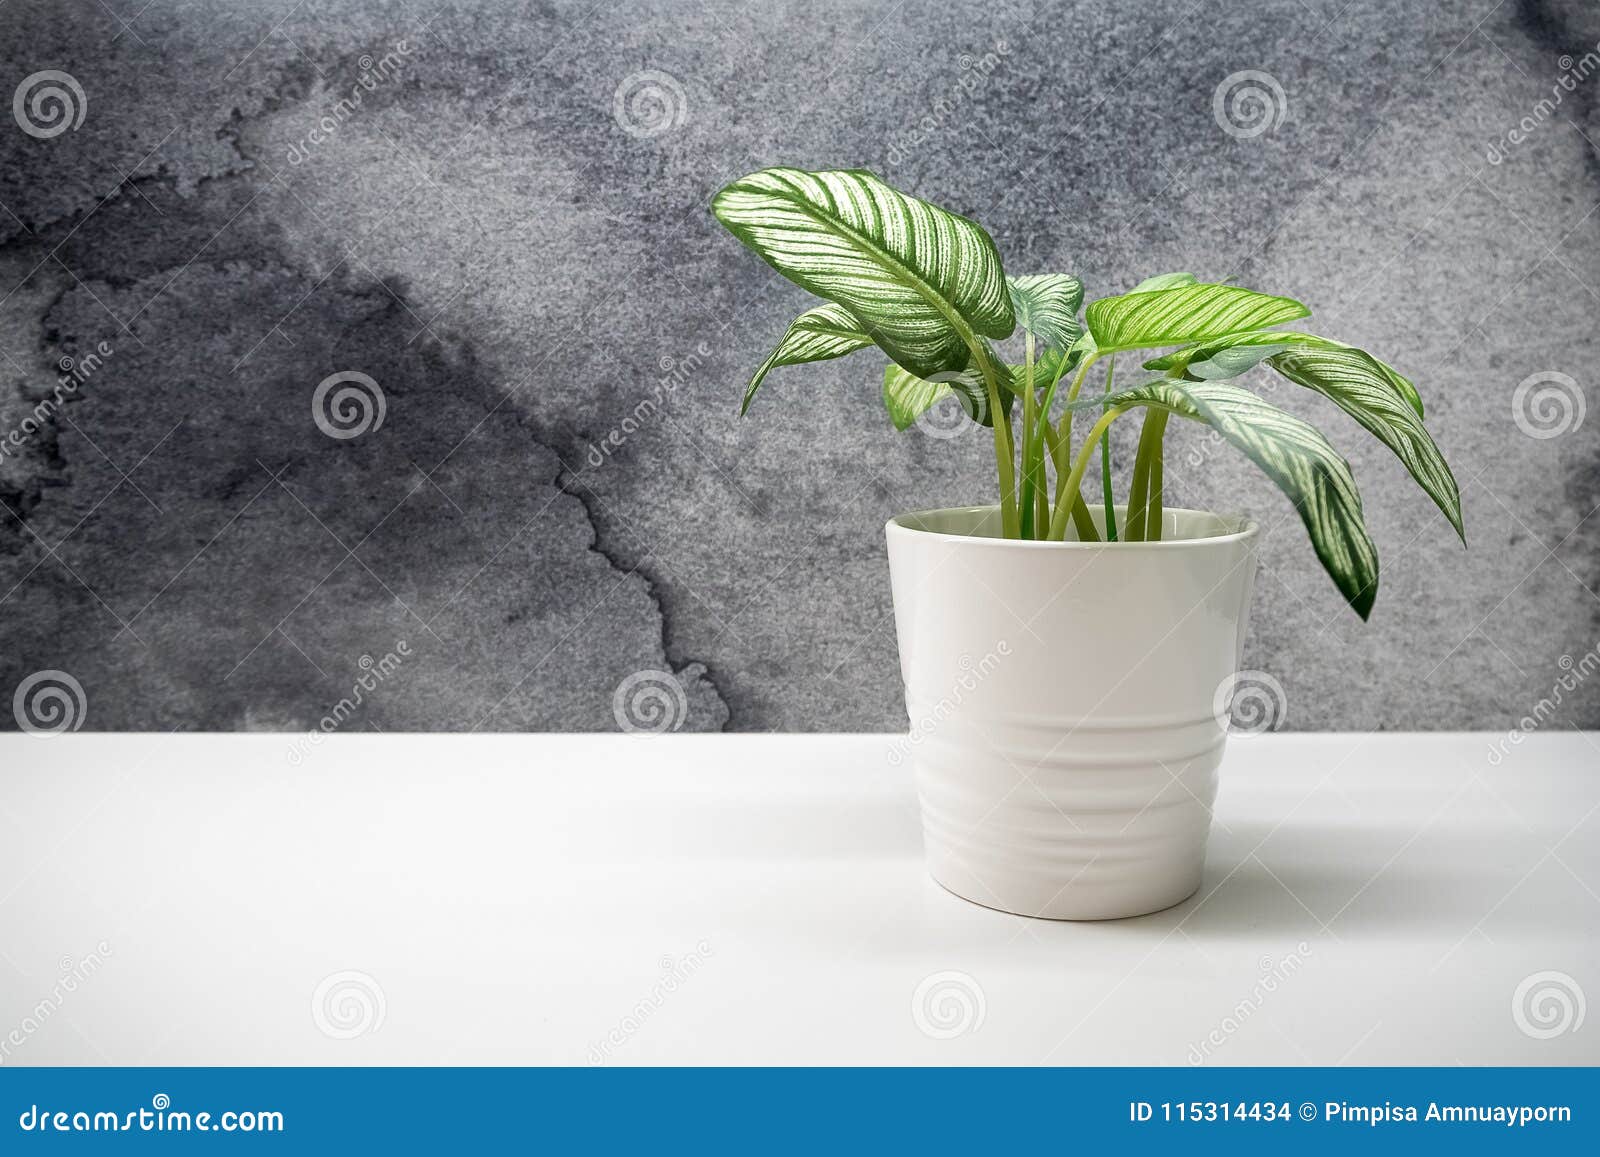 Small Green Plant In Flower Pots For Interior Decoration